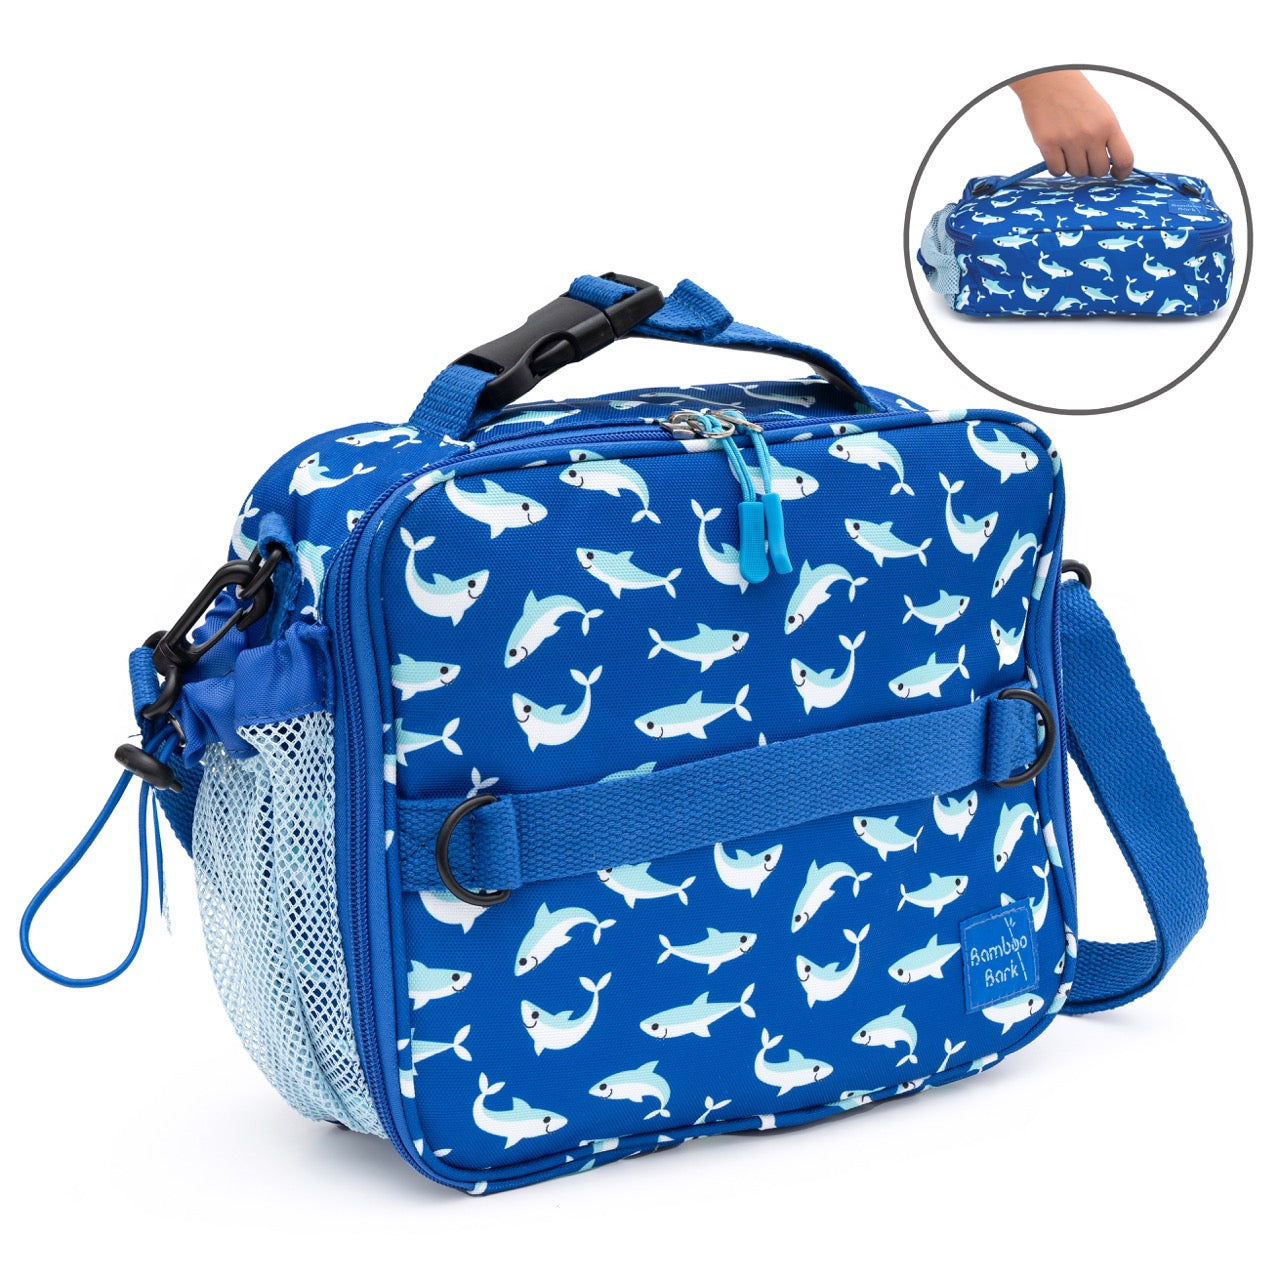 Bamboo Bark Sharks print insulated Lunch Bag with 3 carrying options